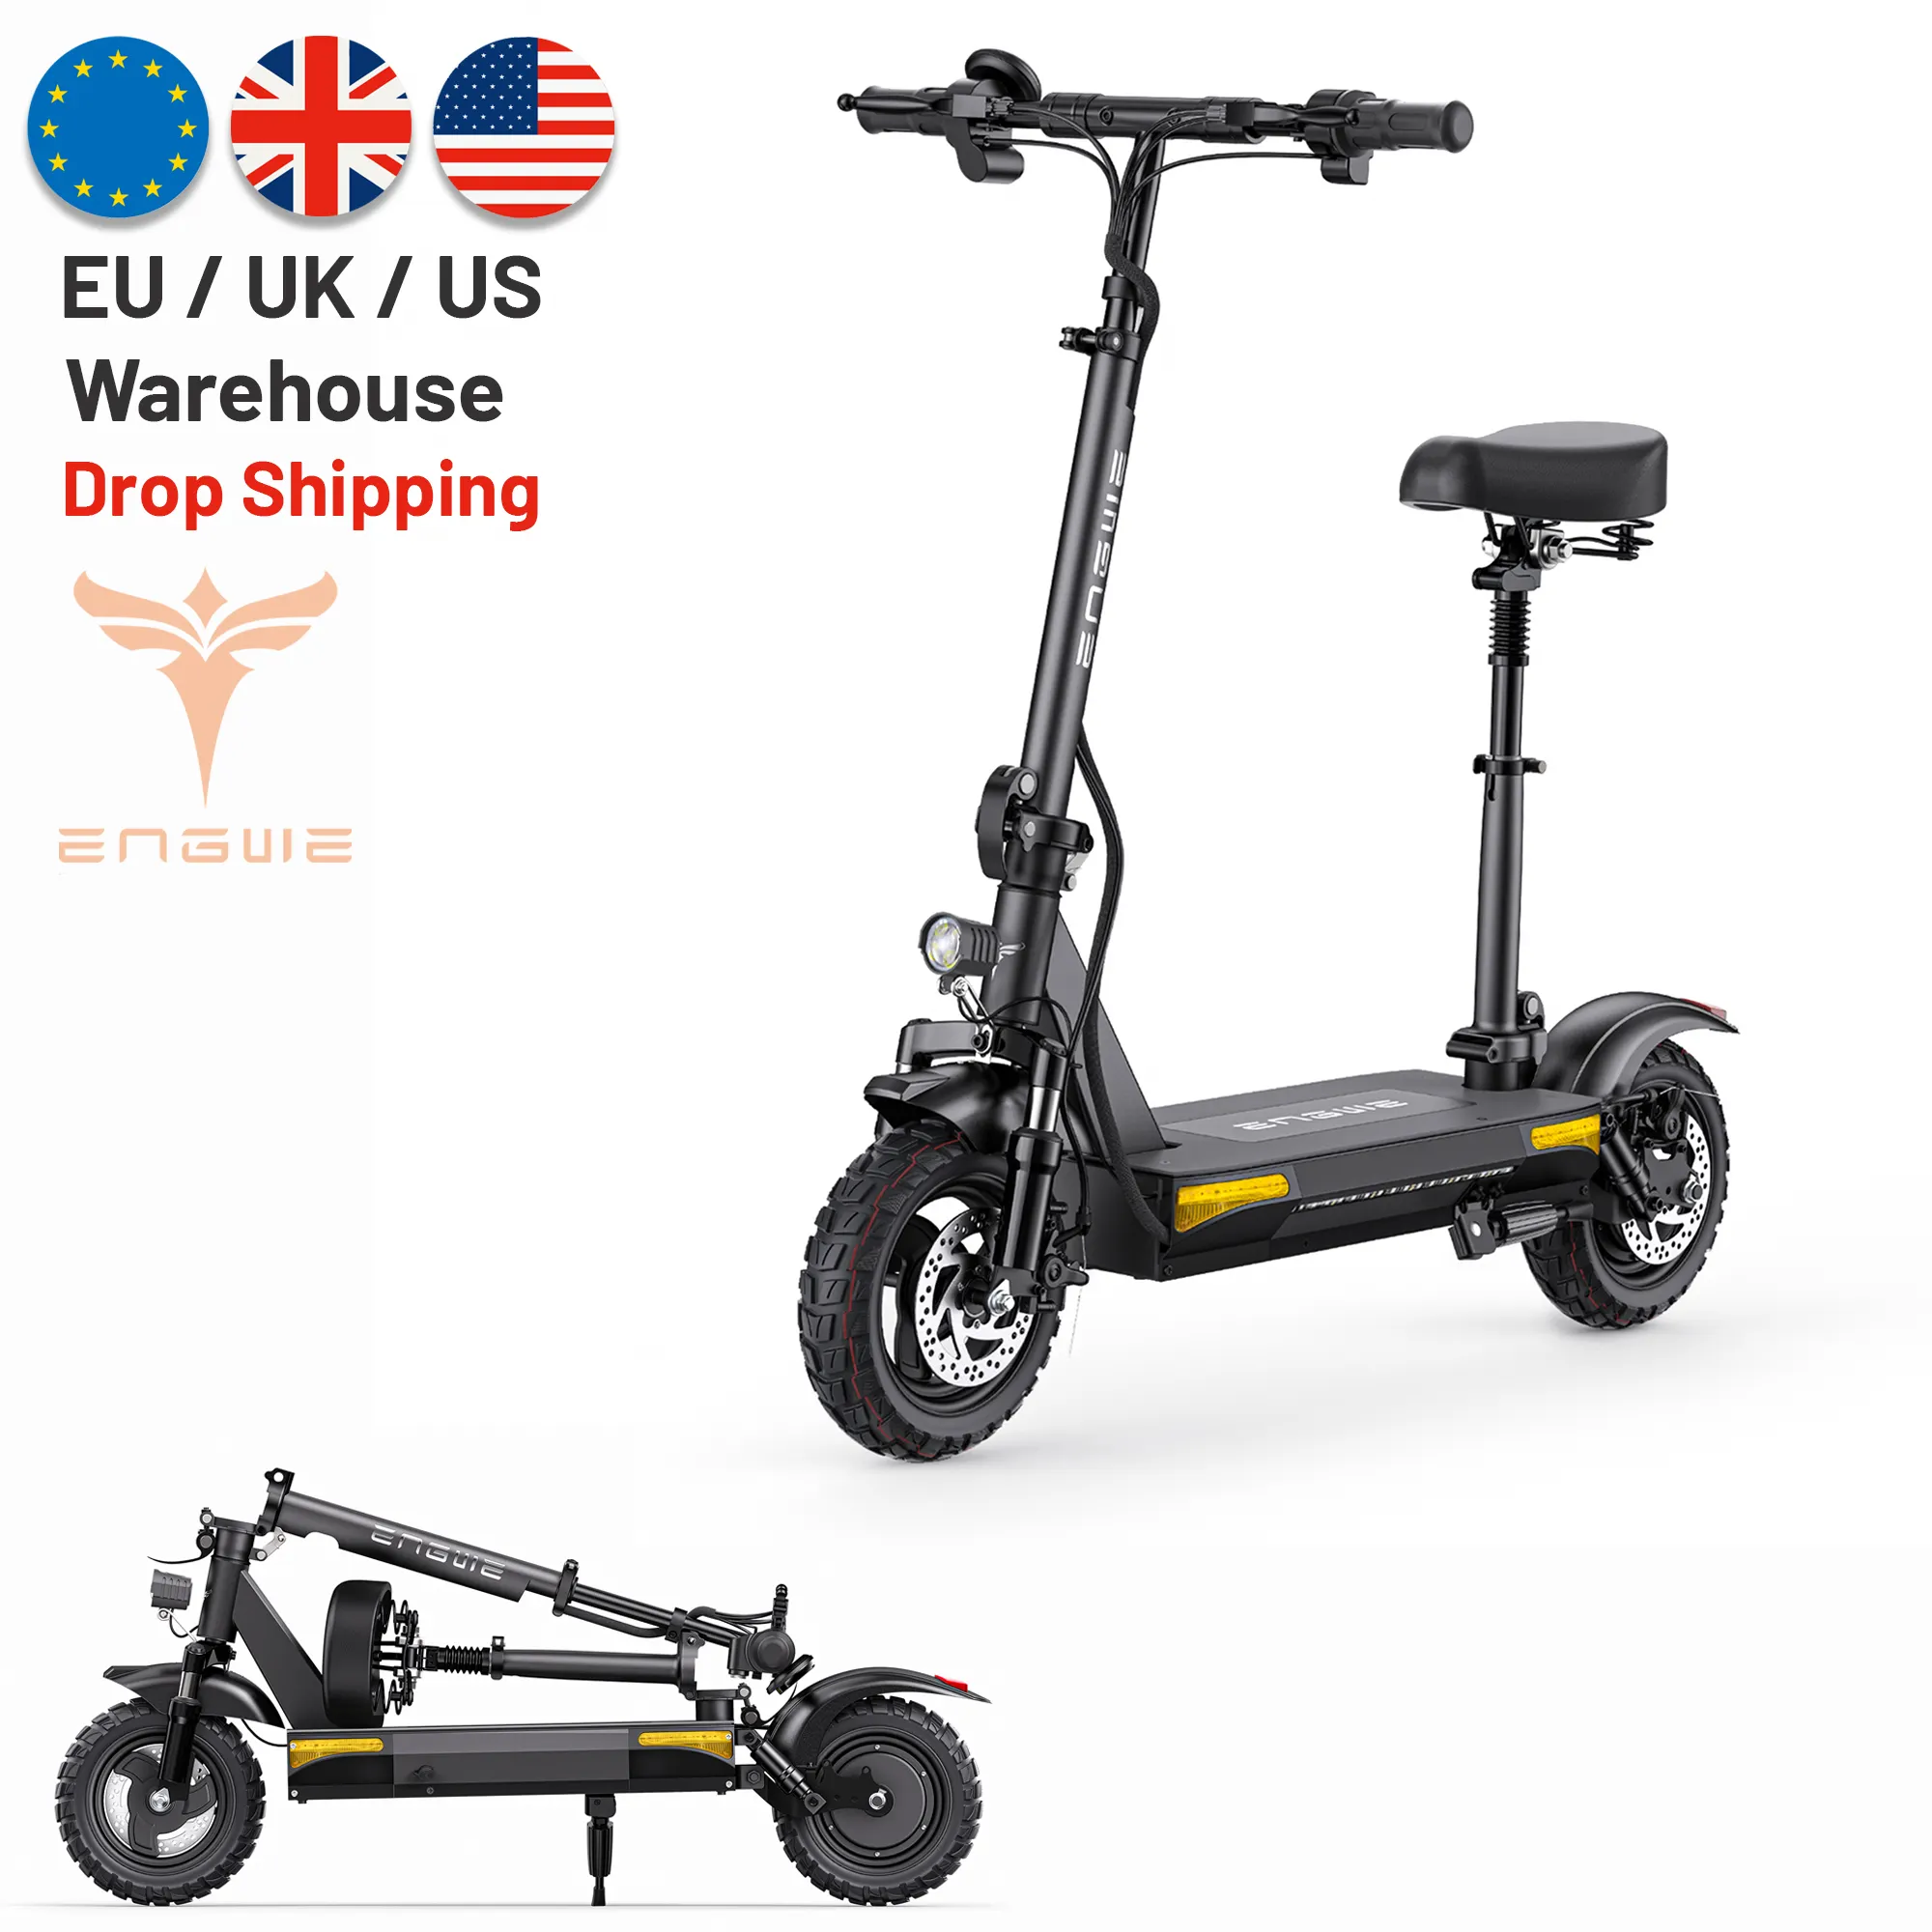 ENGWE S6 Scooter Electric 6.5in Tire Newest 500W 700W Motor 48V 15.6Ah Battery E Scooter Foldable Scooter Two Wheel Off Road